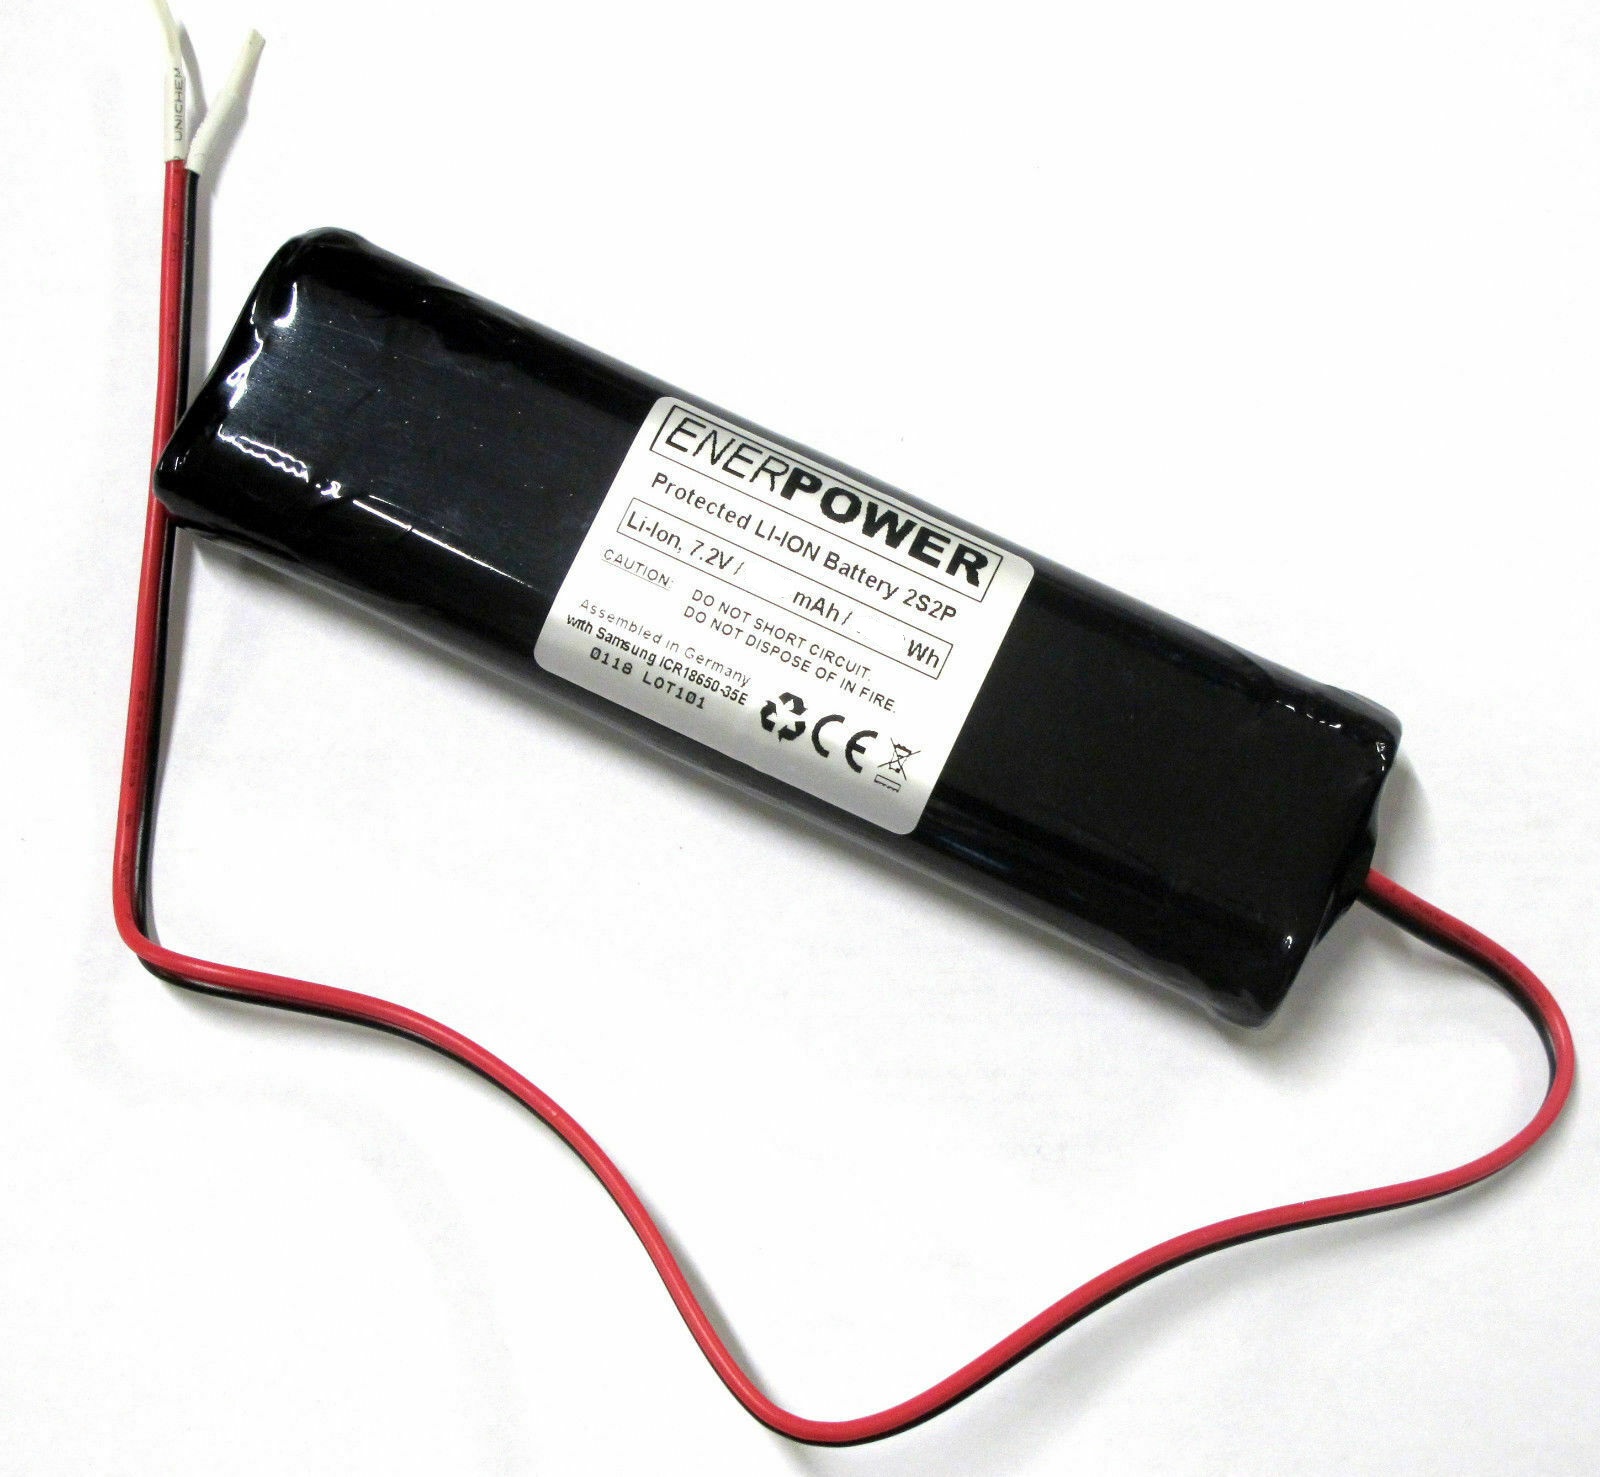 Enerpower 2S2P Li-Ion 7.2V-7.4V with open ended cables